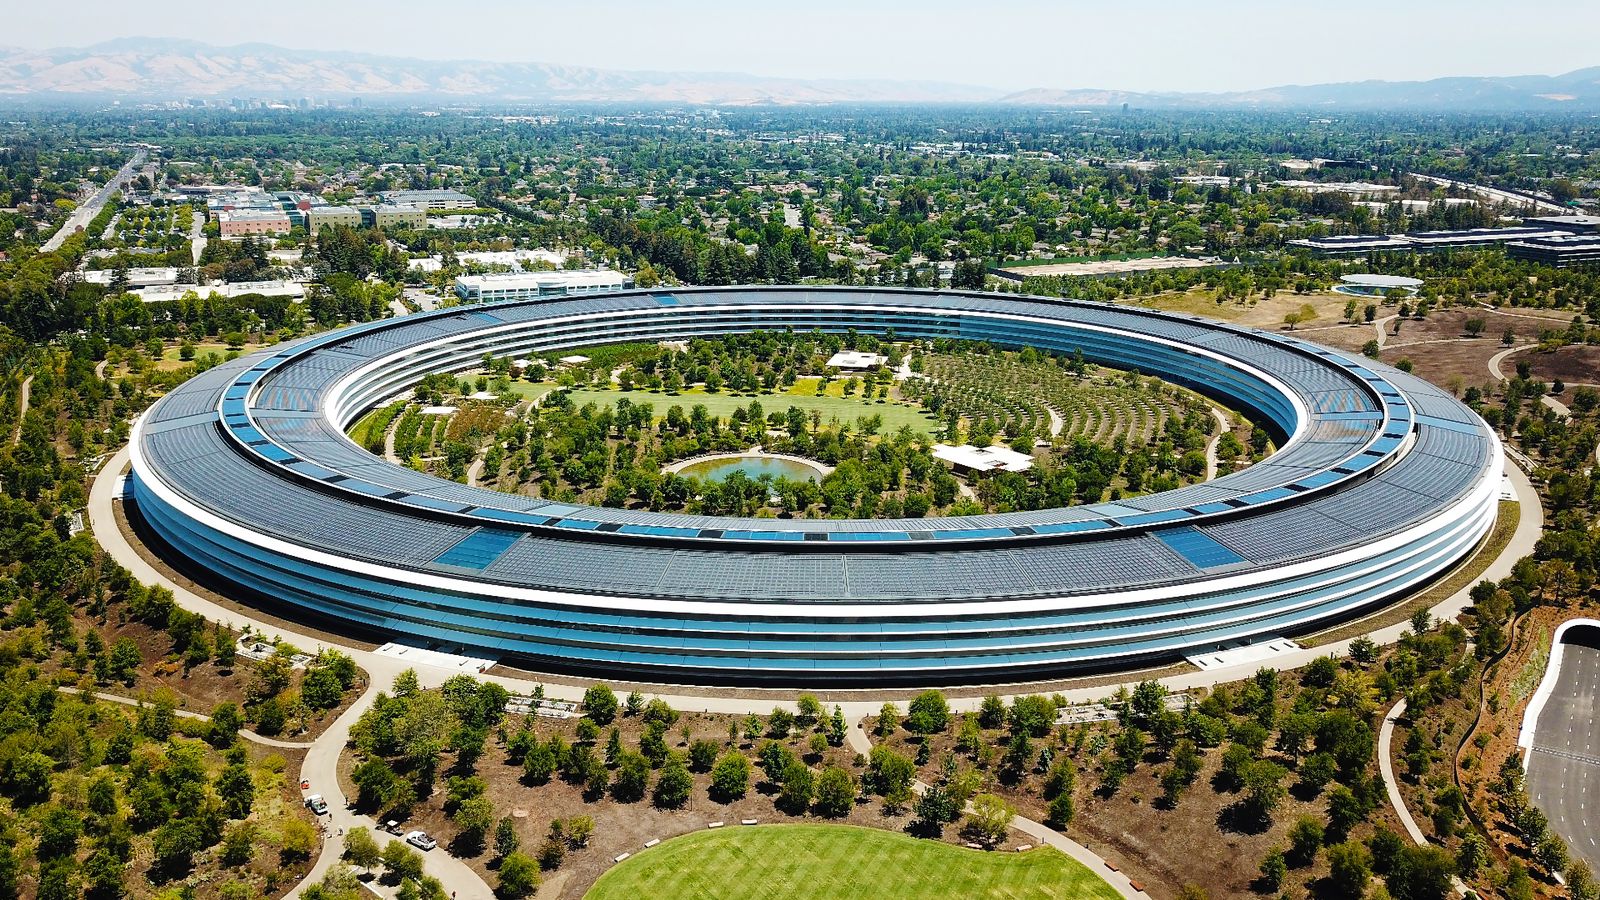 Developers and students will have the opportunity to celebrate in person at a special event at Apple Park on opening day.